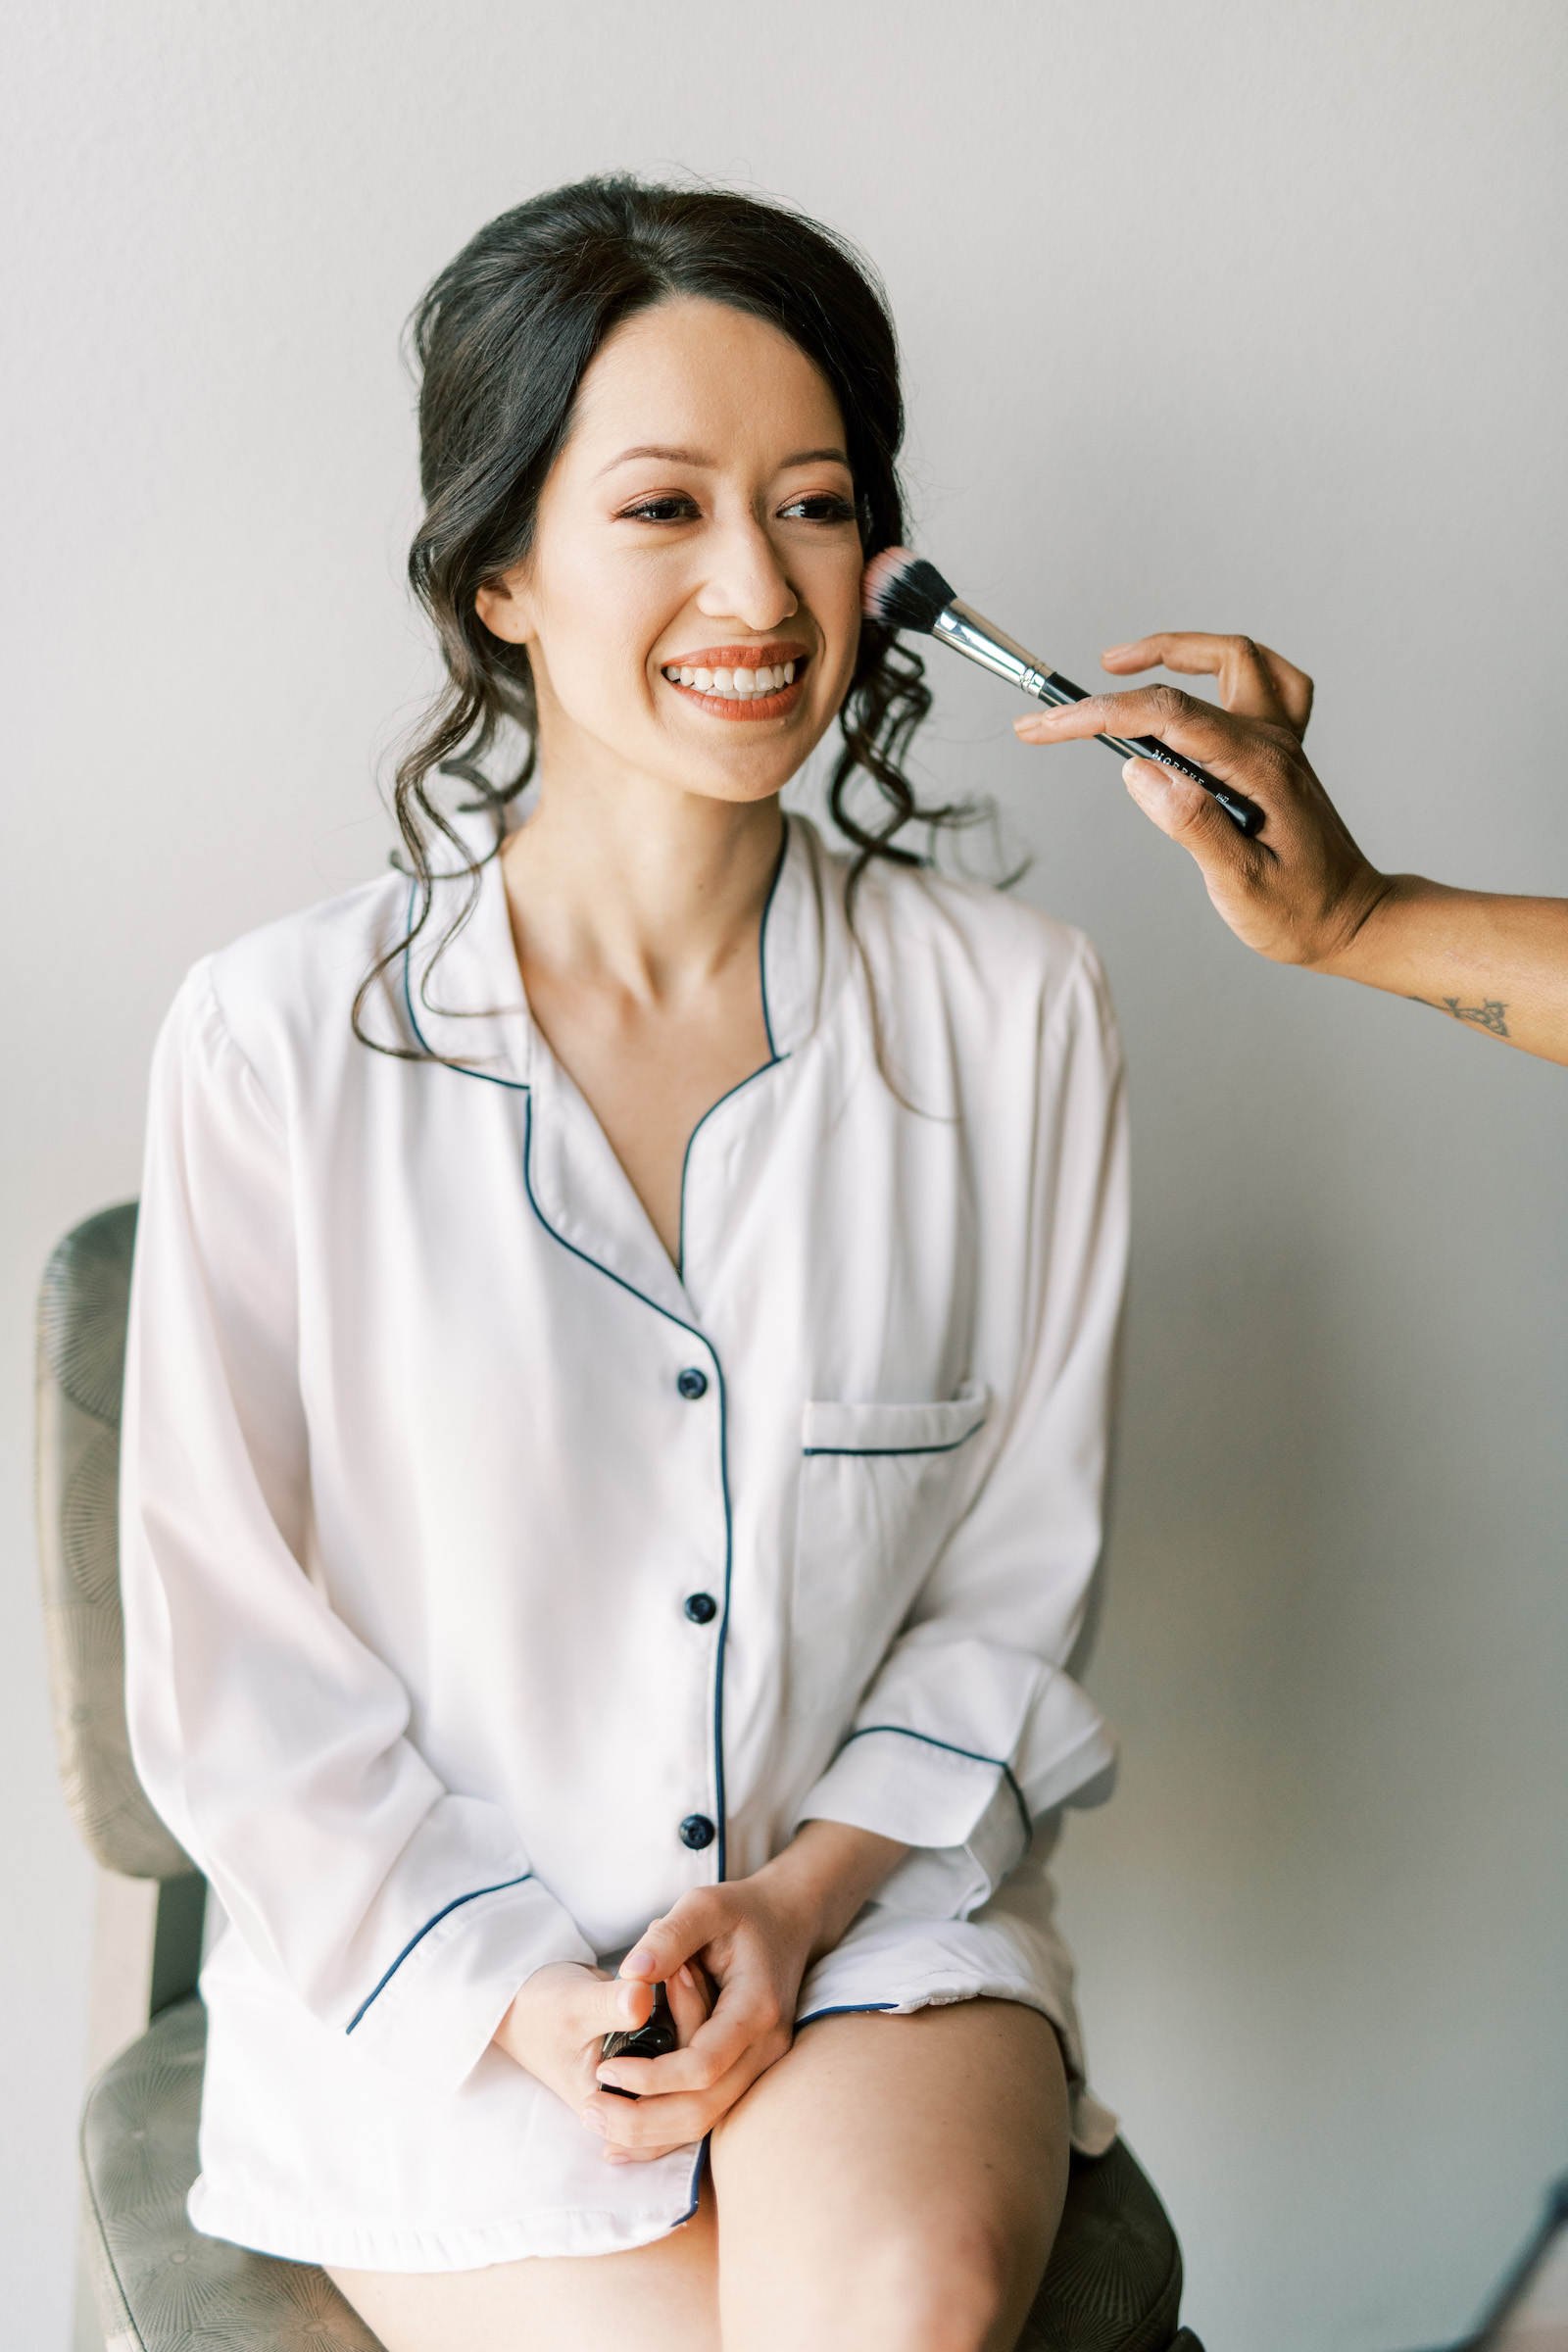 Bride Getting Ready Wedding Portrait in White Pajamas | Femme Akoi Beauty Studio Tampa Bay Hair and Makeup | Kera Photography